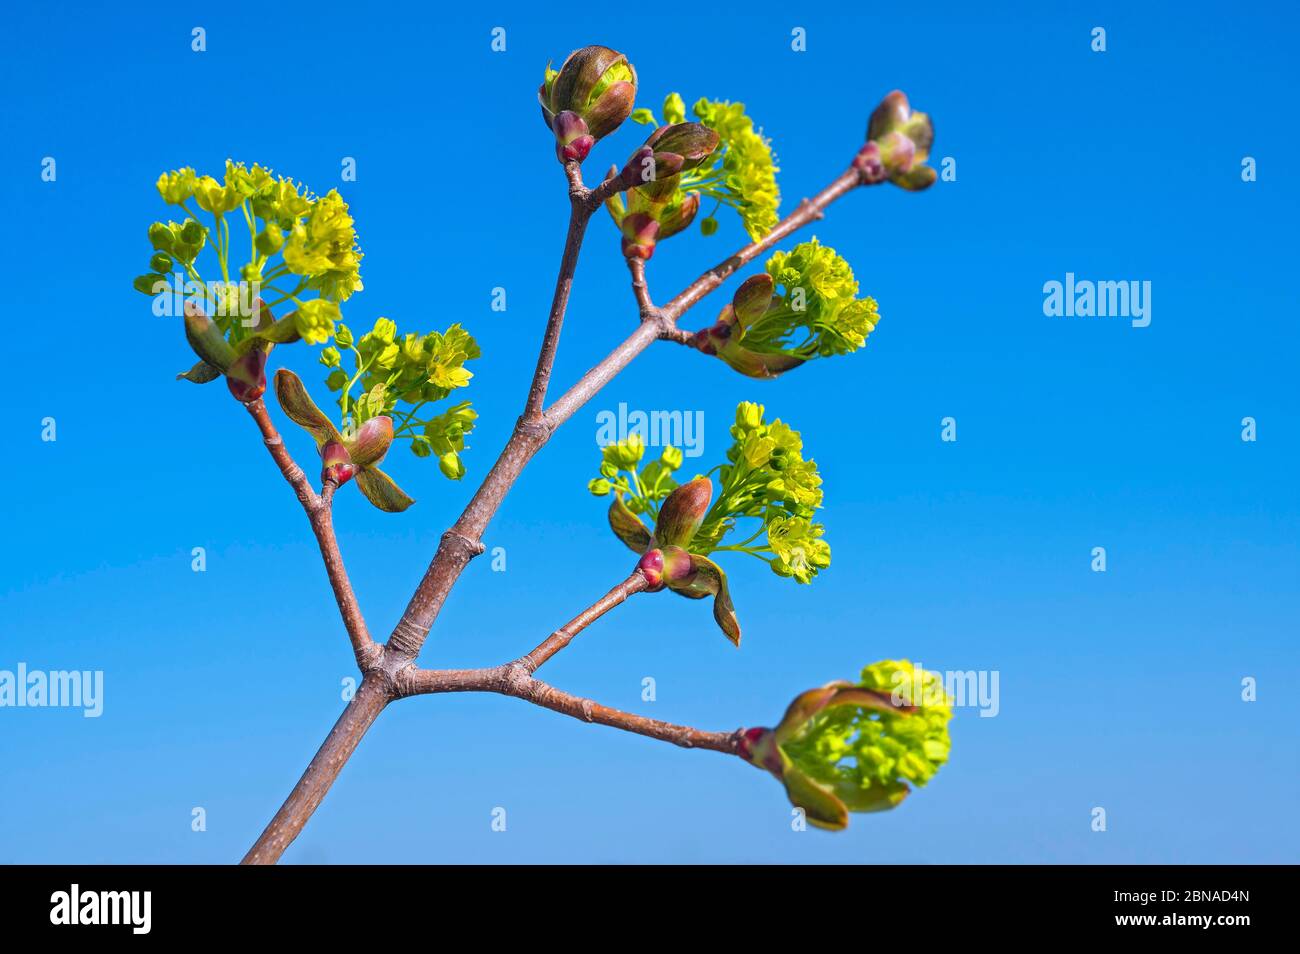 Buds and flowers of a linden tree (Tilia), Upper Bavaria, Bavaria, Germany, Europe Stock Photo